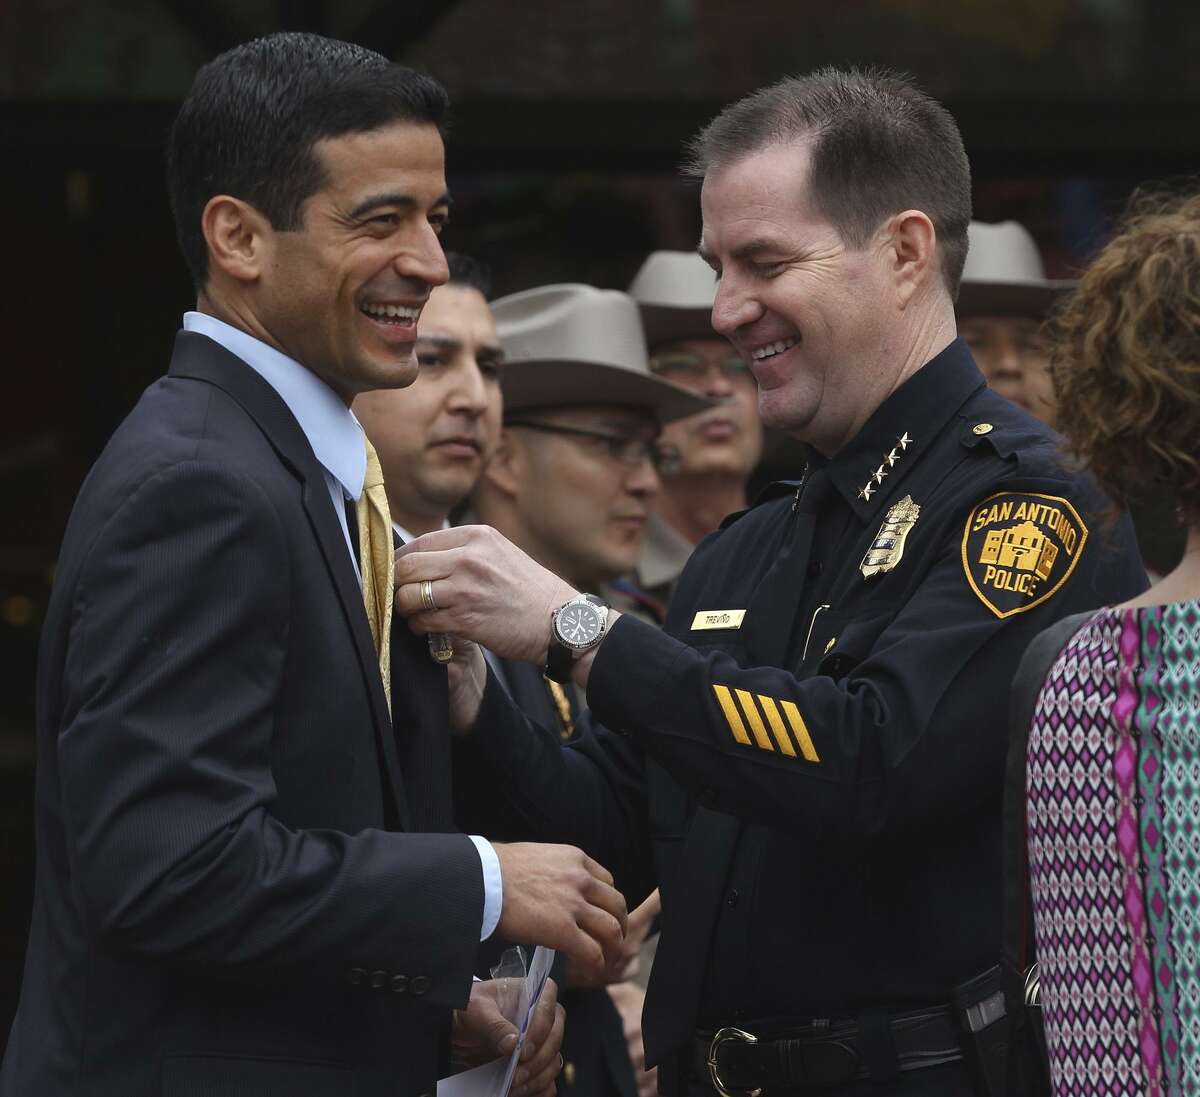 Bexar County District Attorney Nico LaHood (left) at a 2015 Fiesta ceremony with then-San Antonio Police Chief Anthony Treviño. In 2015, Treviño indefinitely suspended Officer Matthew Martin for allegedly altering evidence related to a drug arrest. LaHood’s office twice declined to bring criminal charges against Martin.